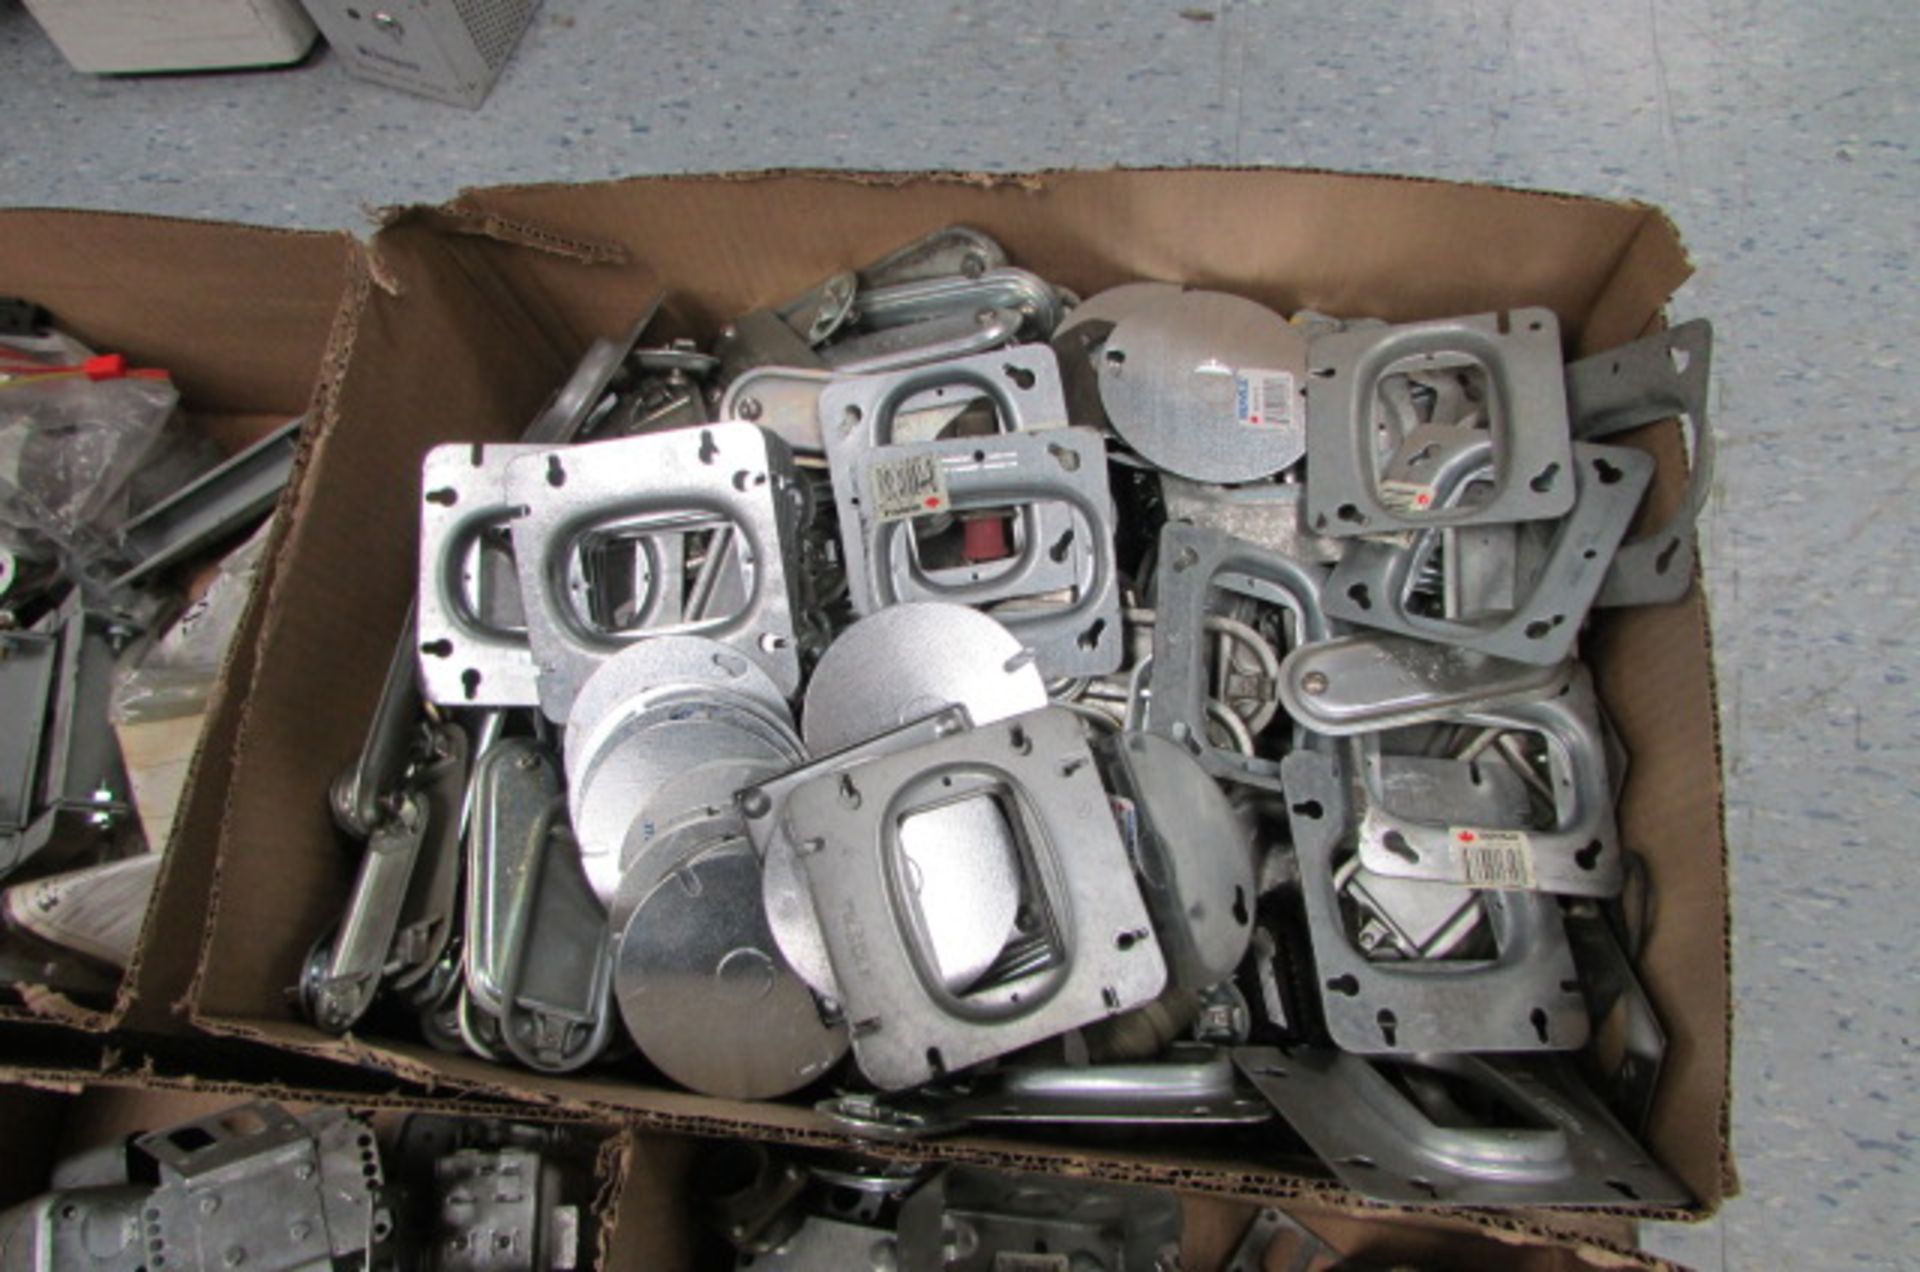 LOT: ASSORTED ELECTRICAL COMPONENTS, GALV. OUTLET BOXES, PLATES, SUPPORTS, MALE/FEMALE 110/220VOLT - Image 4 of 4